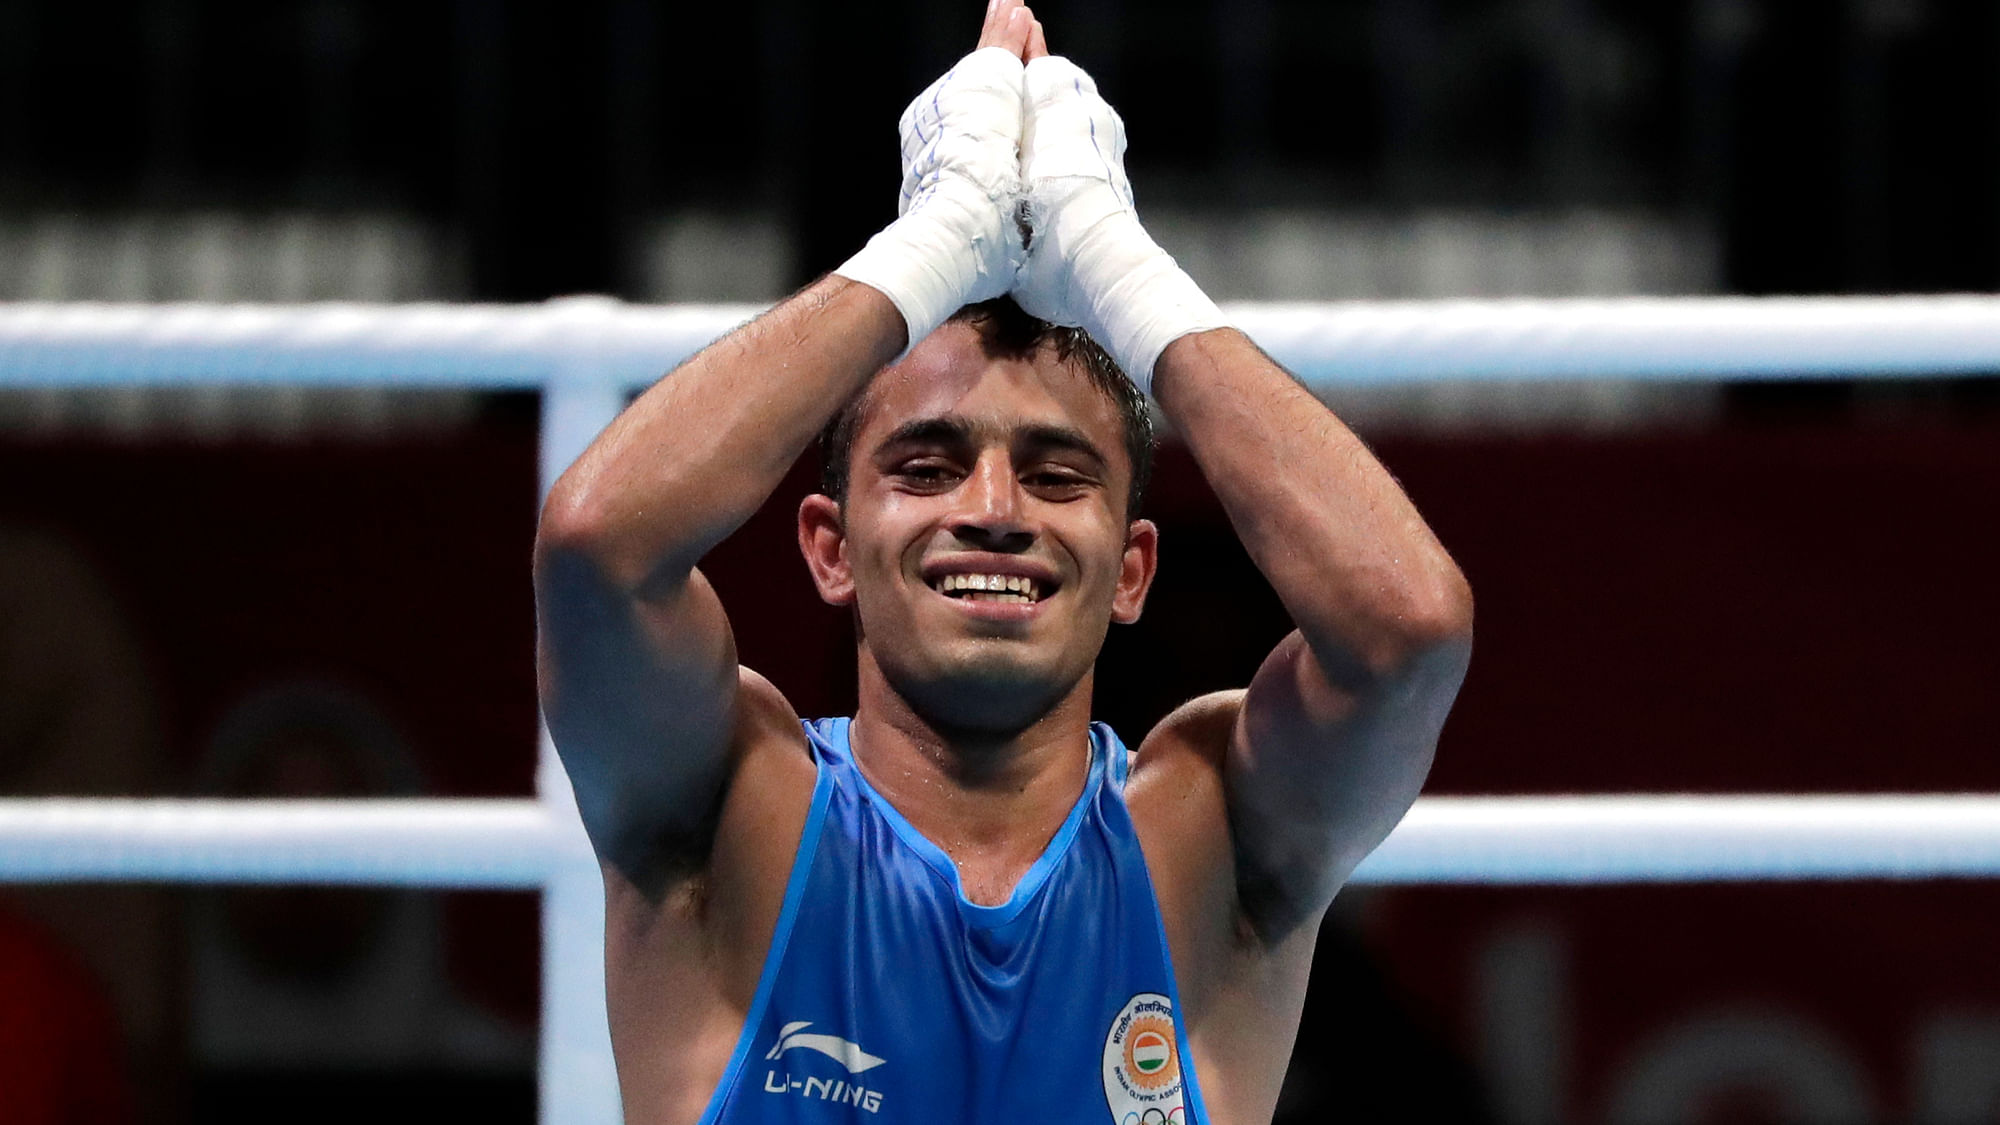 India’s Asian Games gold medallist Amit Panghal has clinched a gold medal at the Strandja Memorial Tournament in Bulgaria.